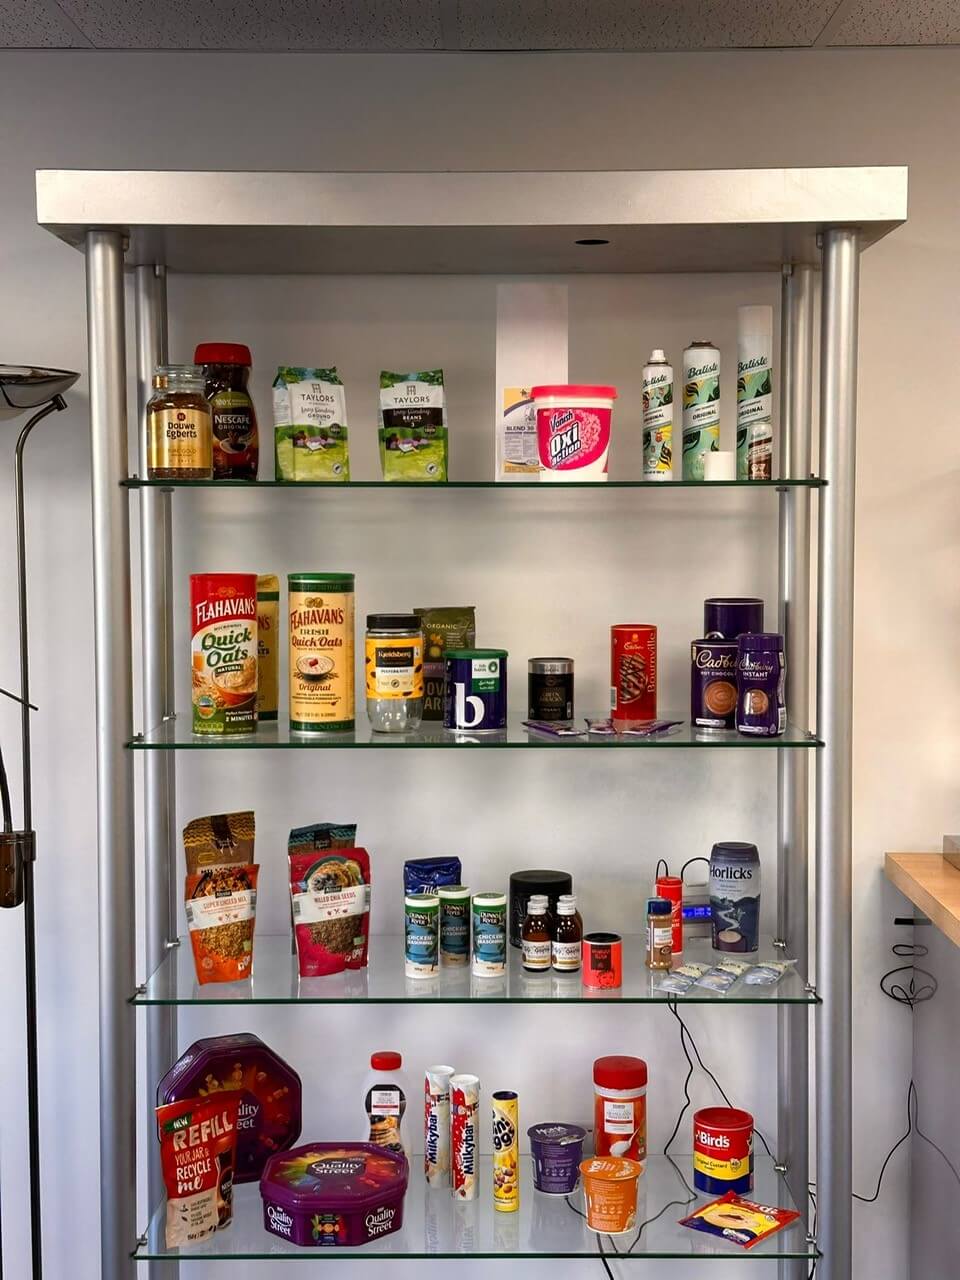 Project sample cabinet